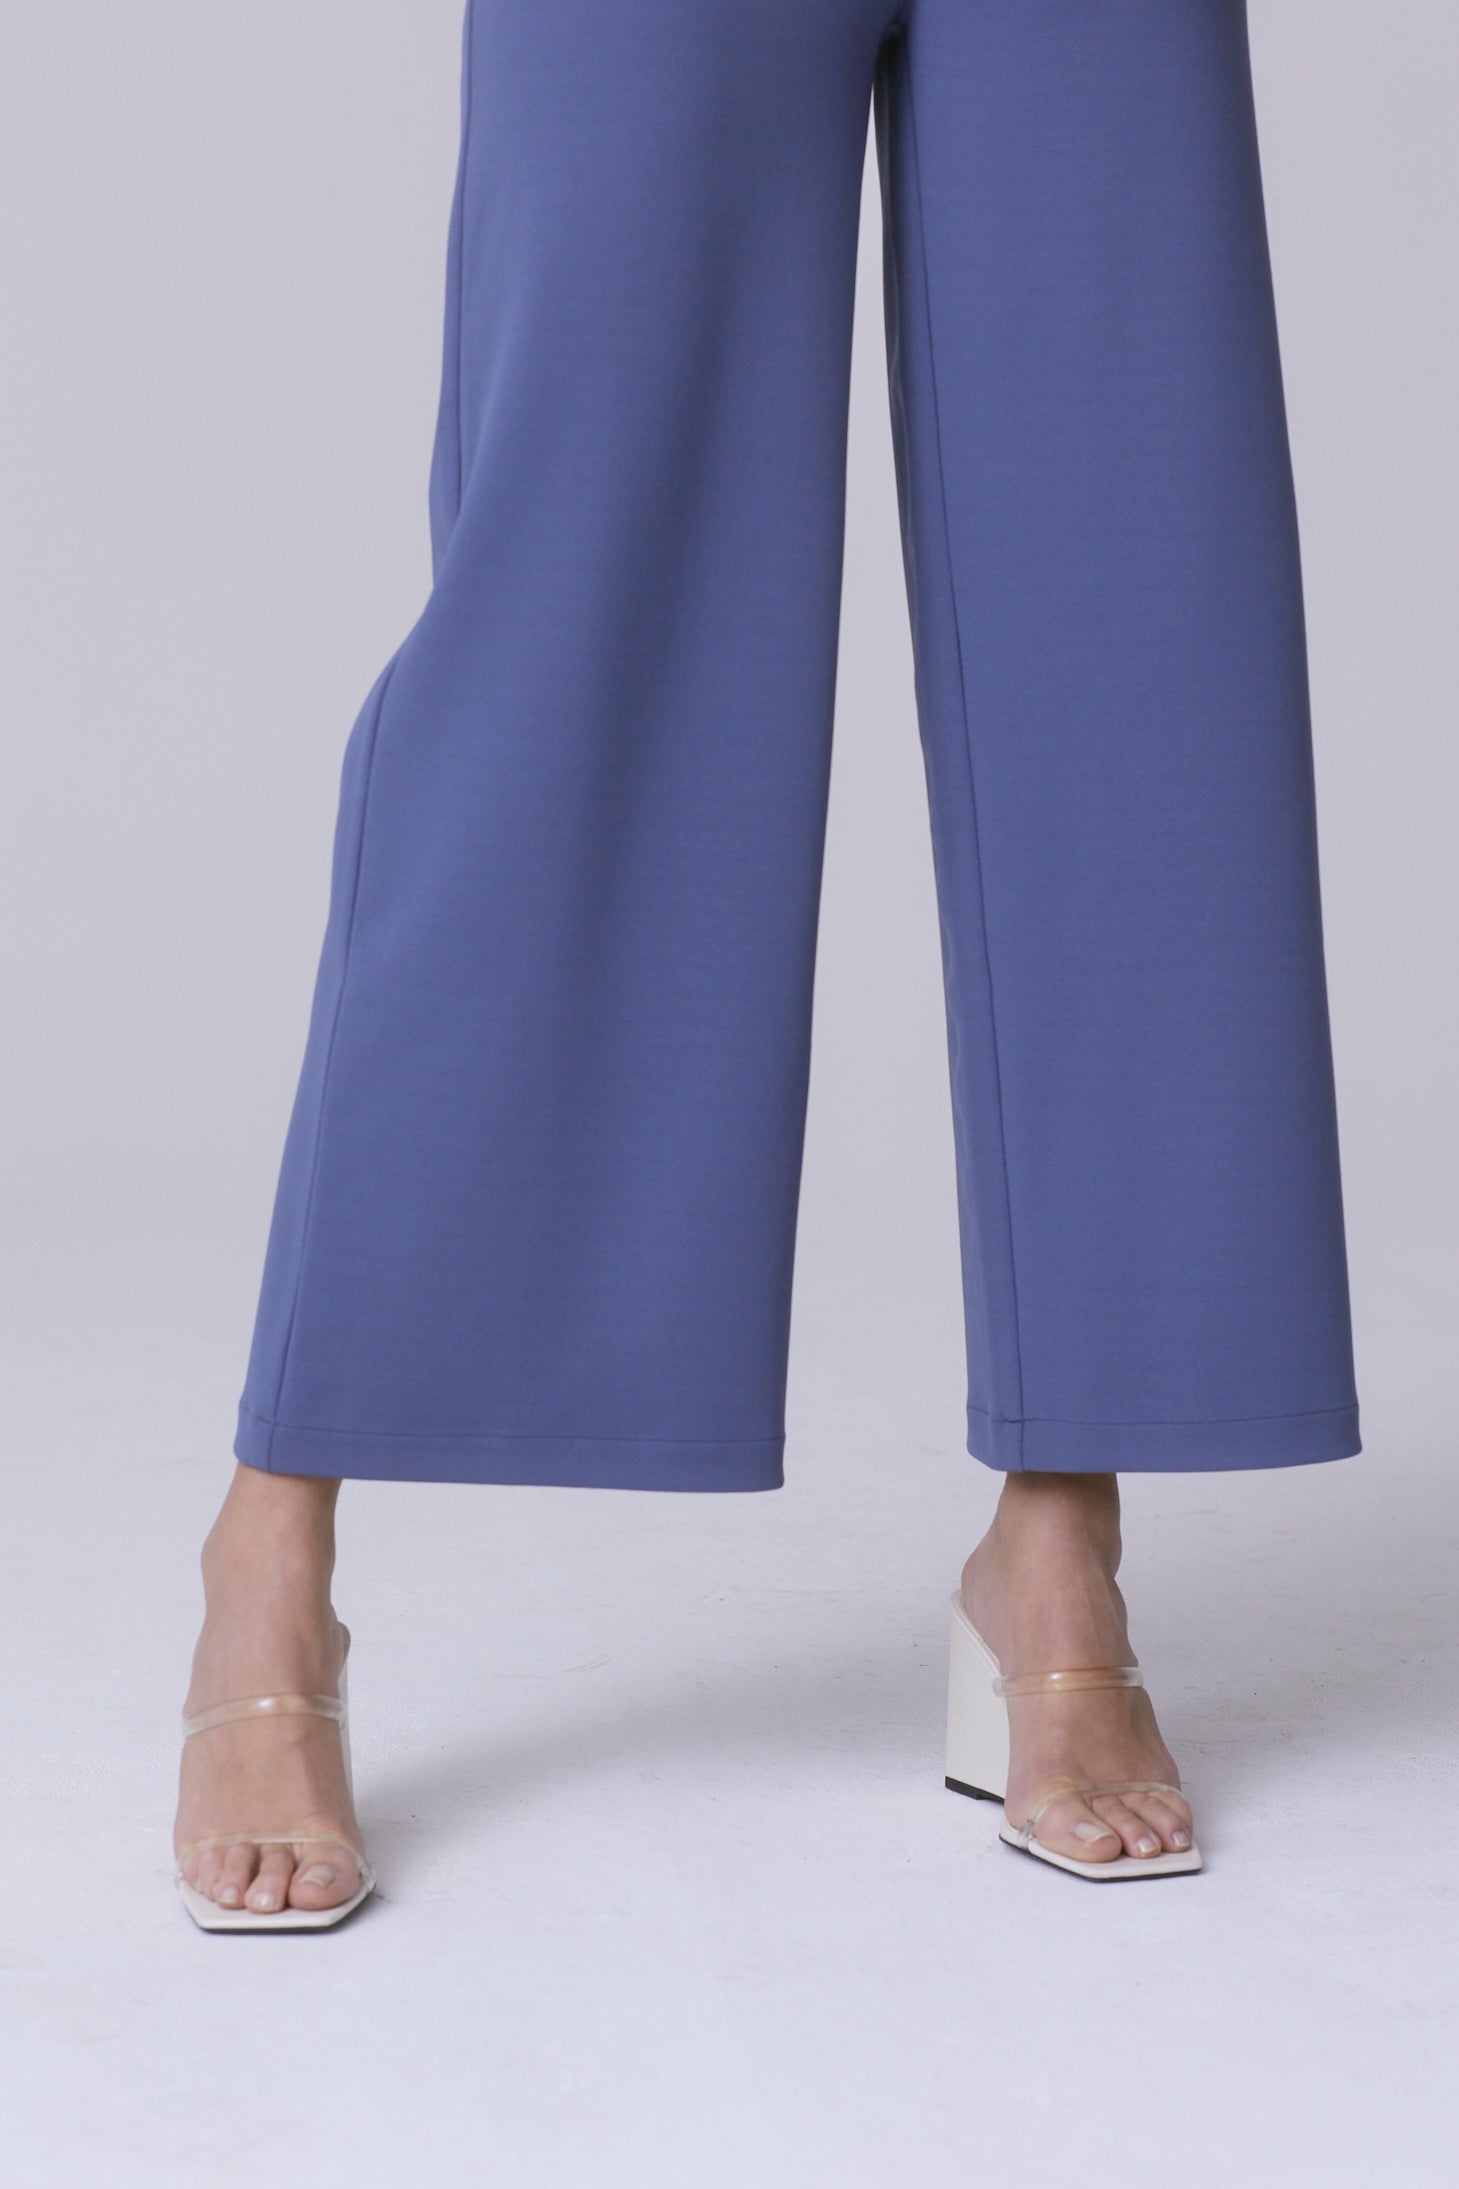 The Knit Wide Leg in Cirrus Crepe